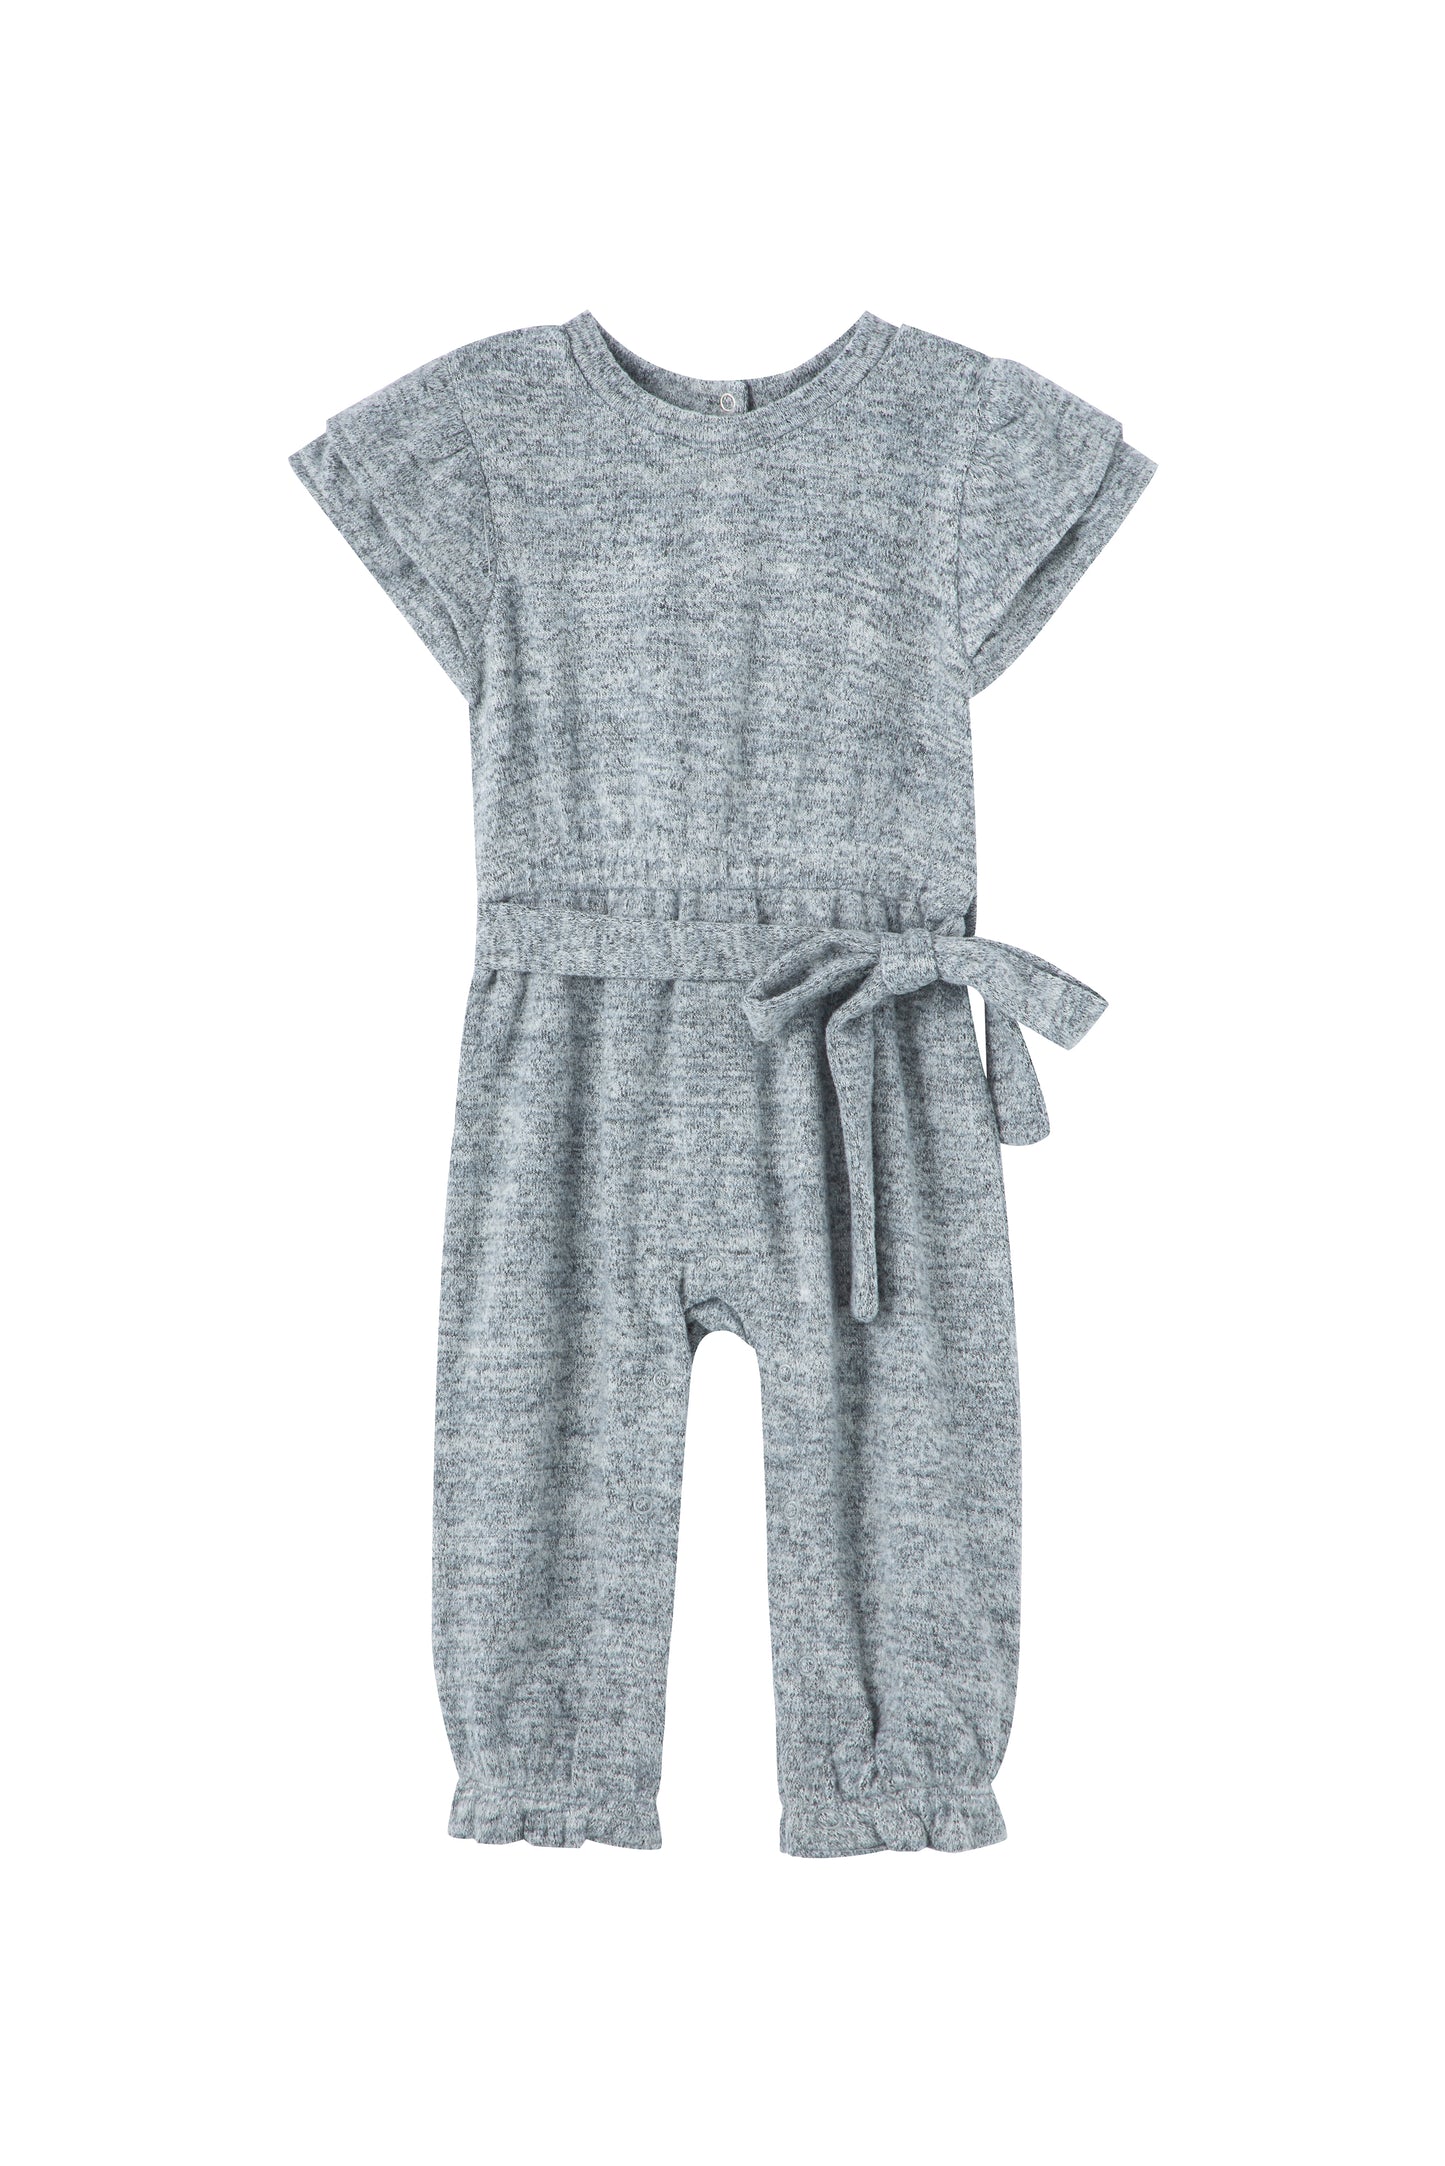 Front view of grey knit jumpsuit 